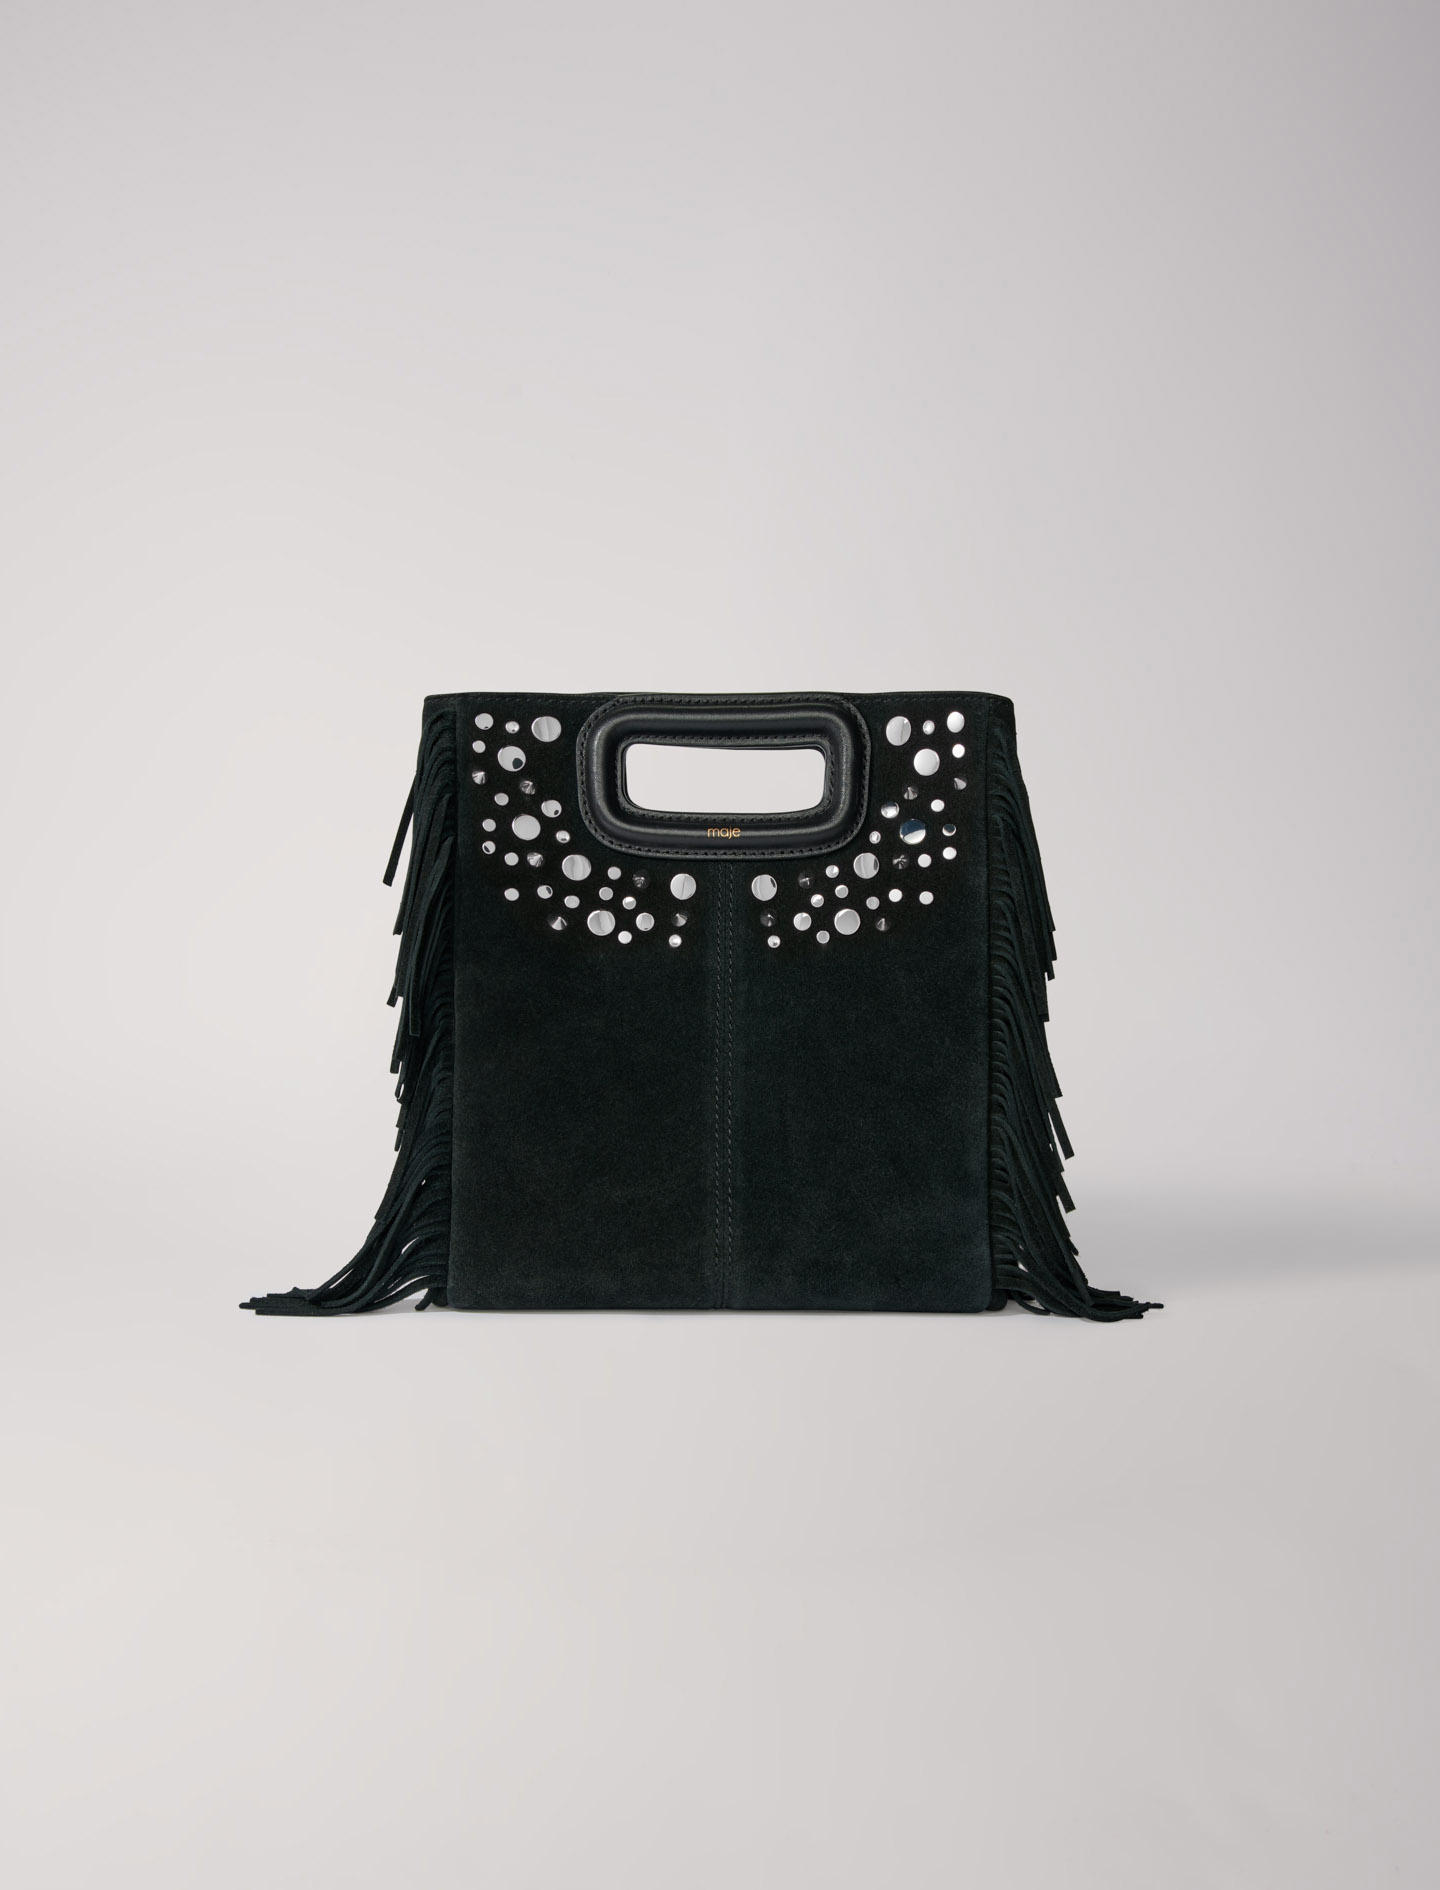 Maje Woman's cotton Leather: Fringed leather M bag for Fall/Winter, in color Black / Black